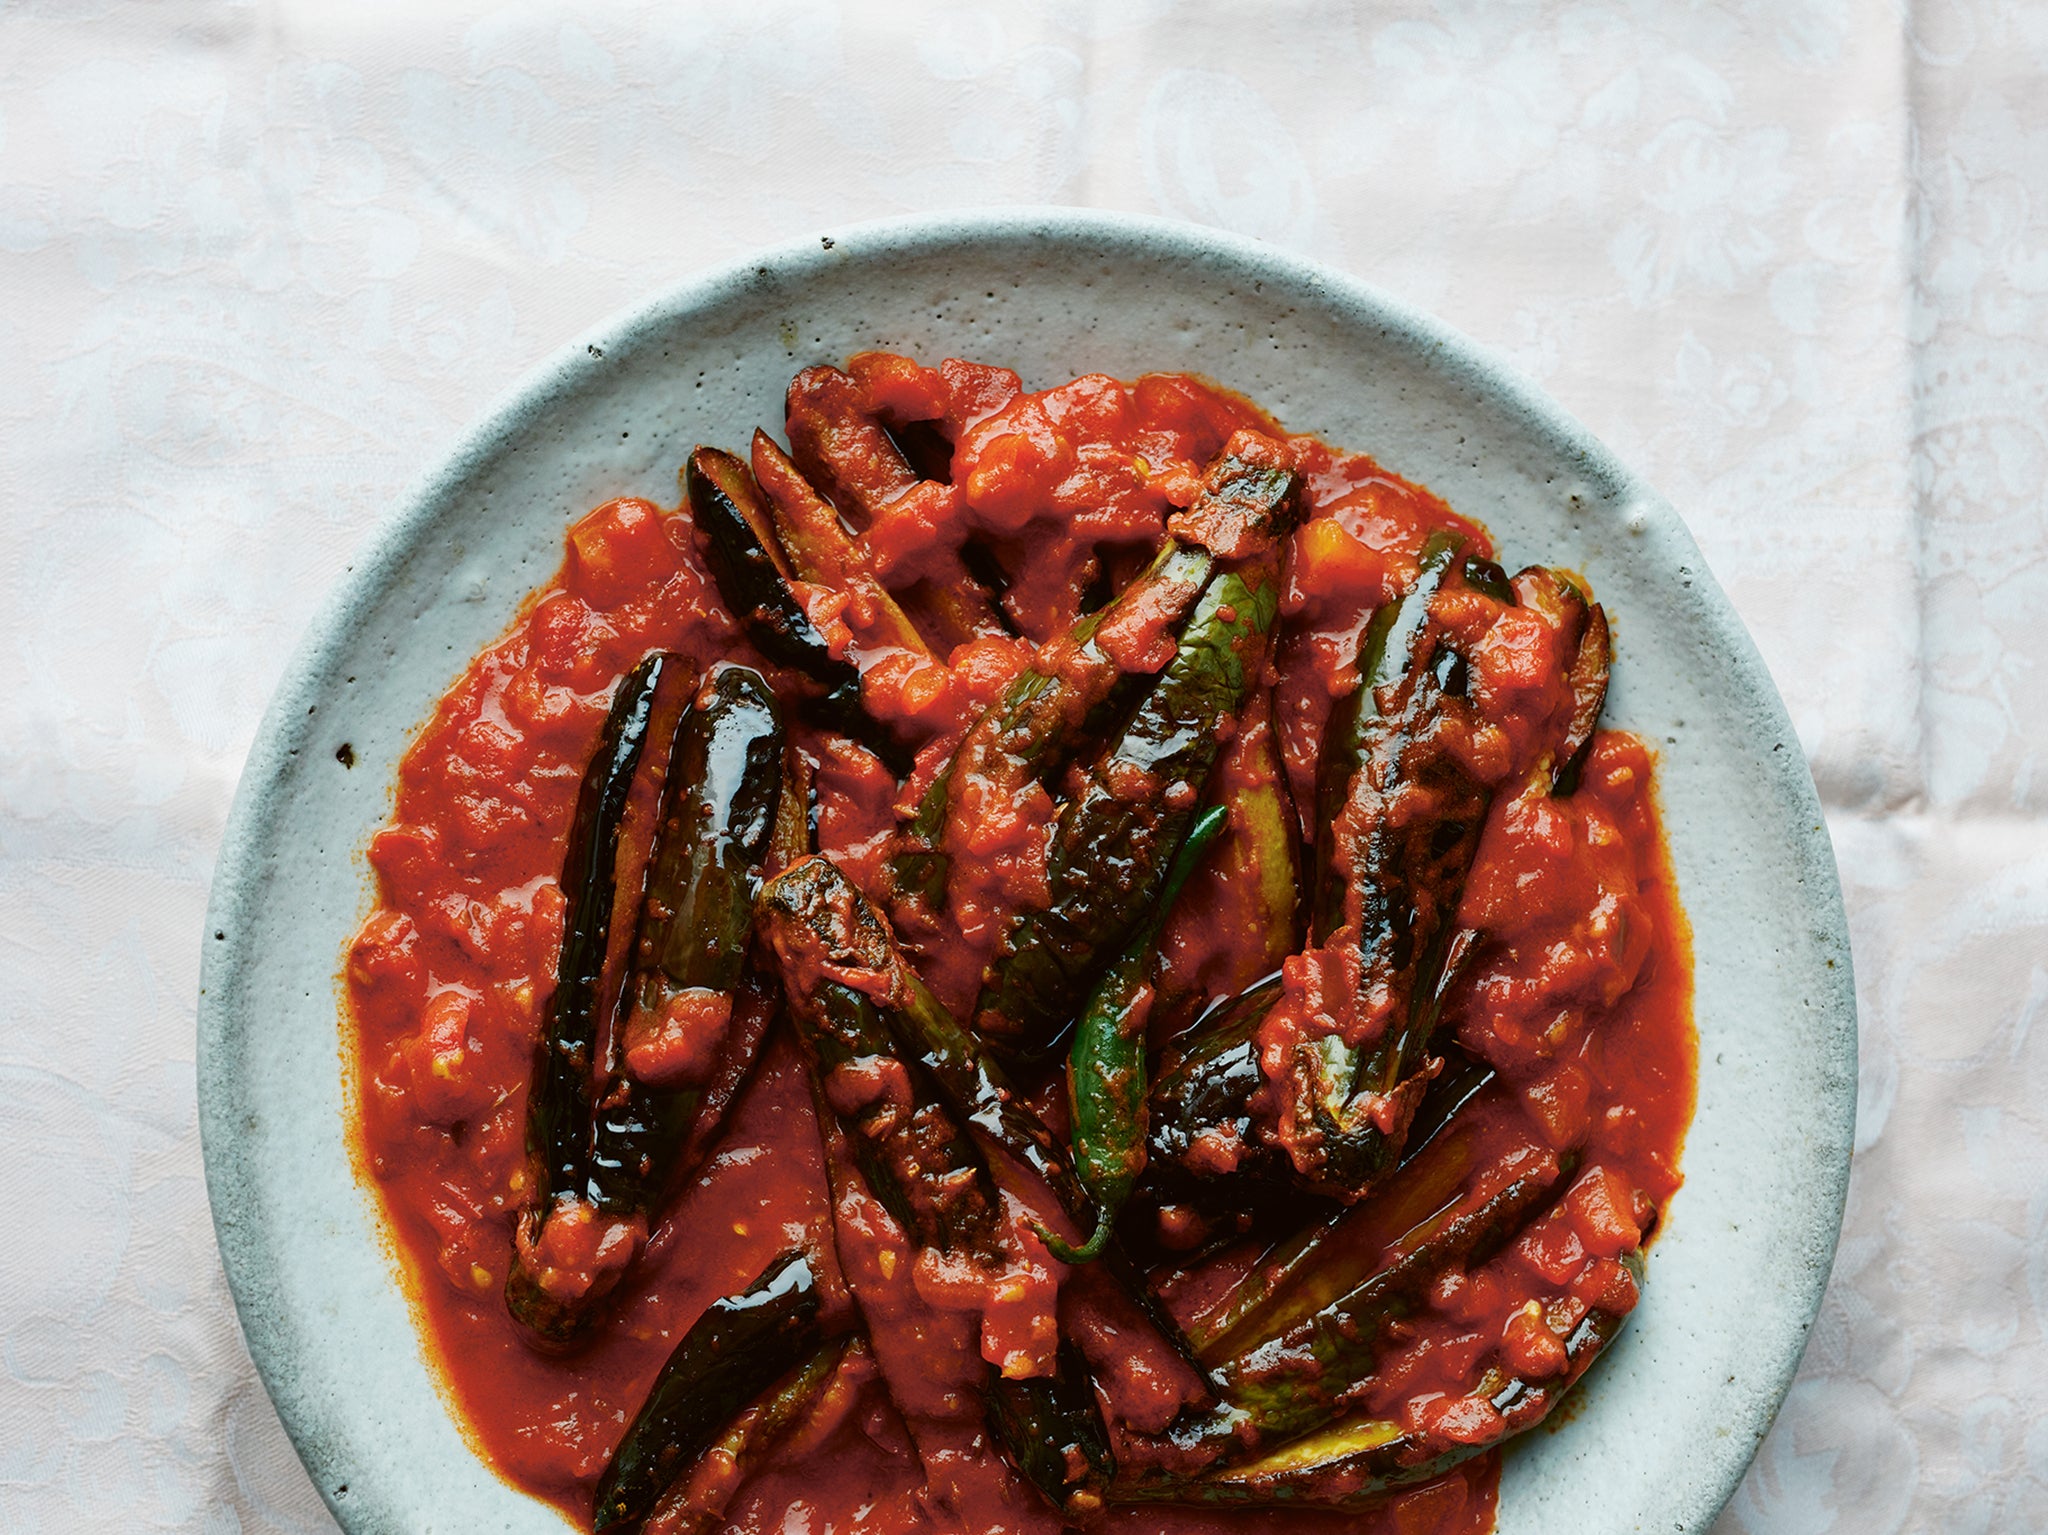 Sweet and sour tomatoes work wonderfully well with aubergines in this dish